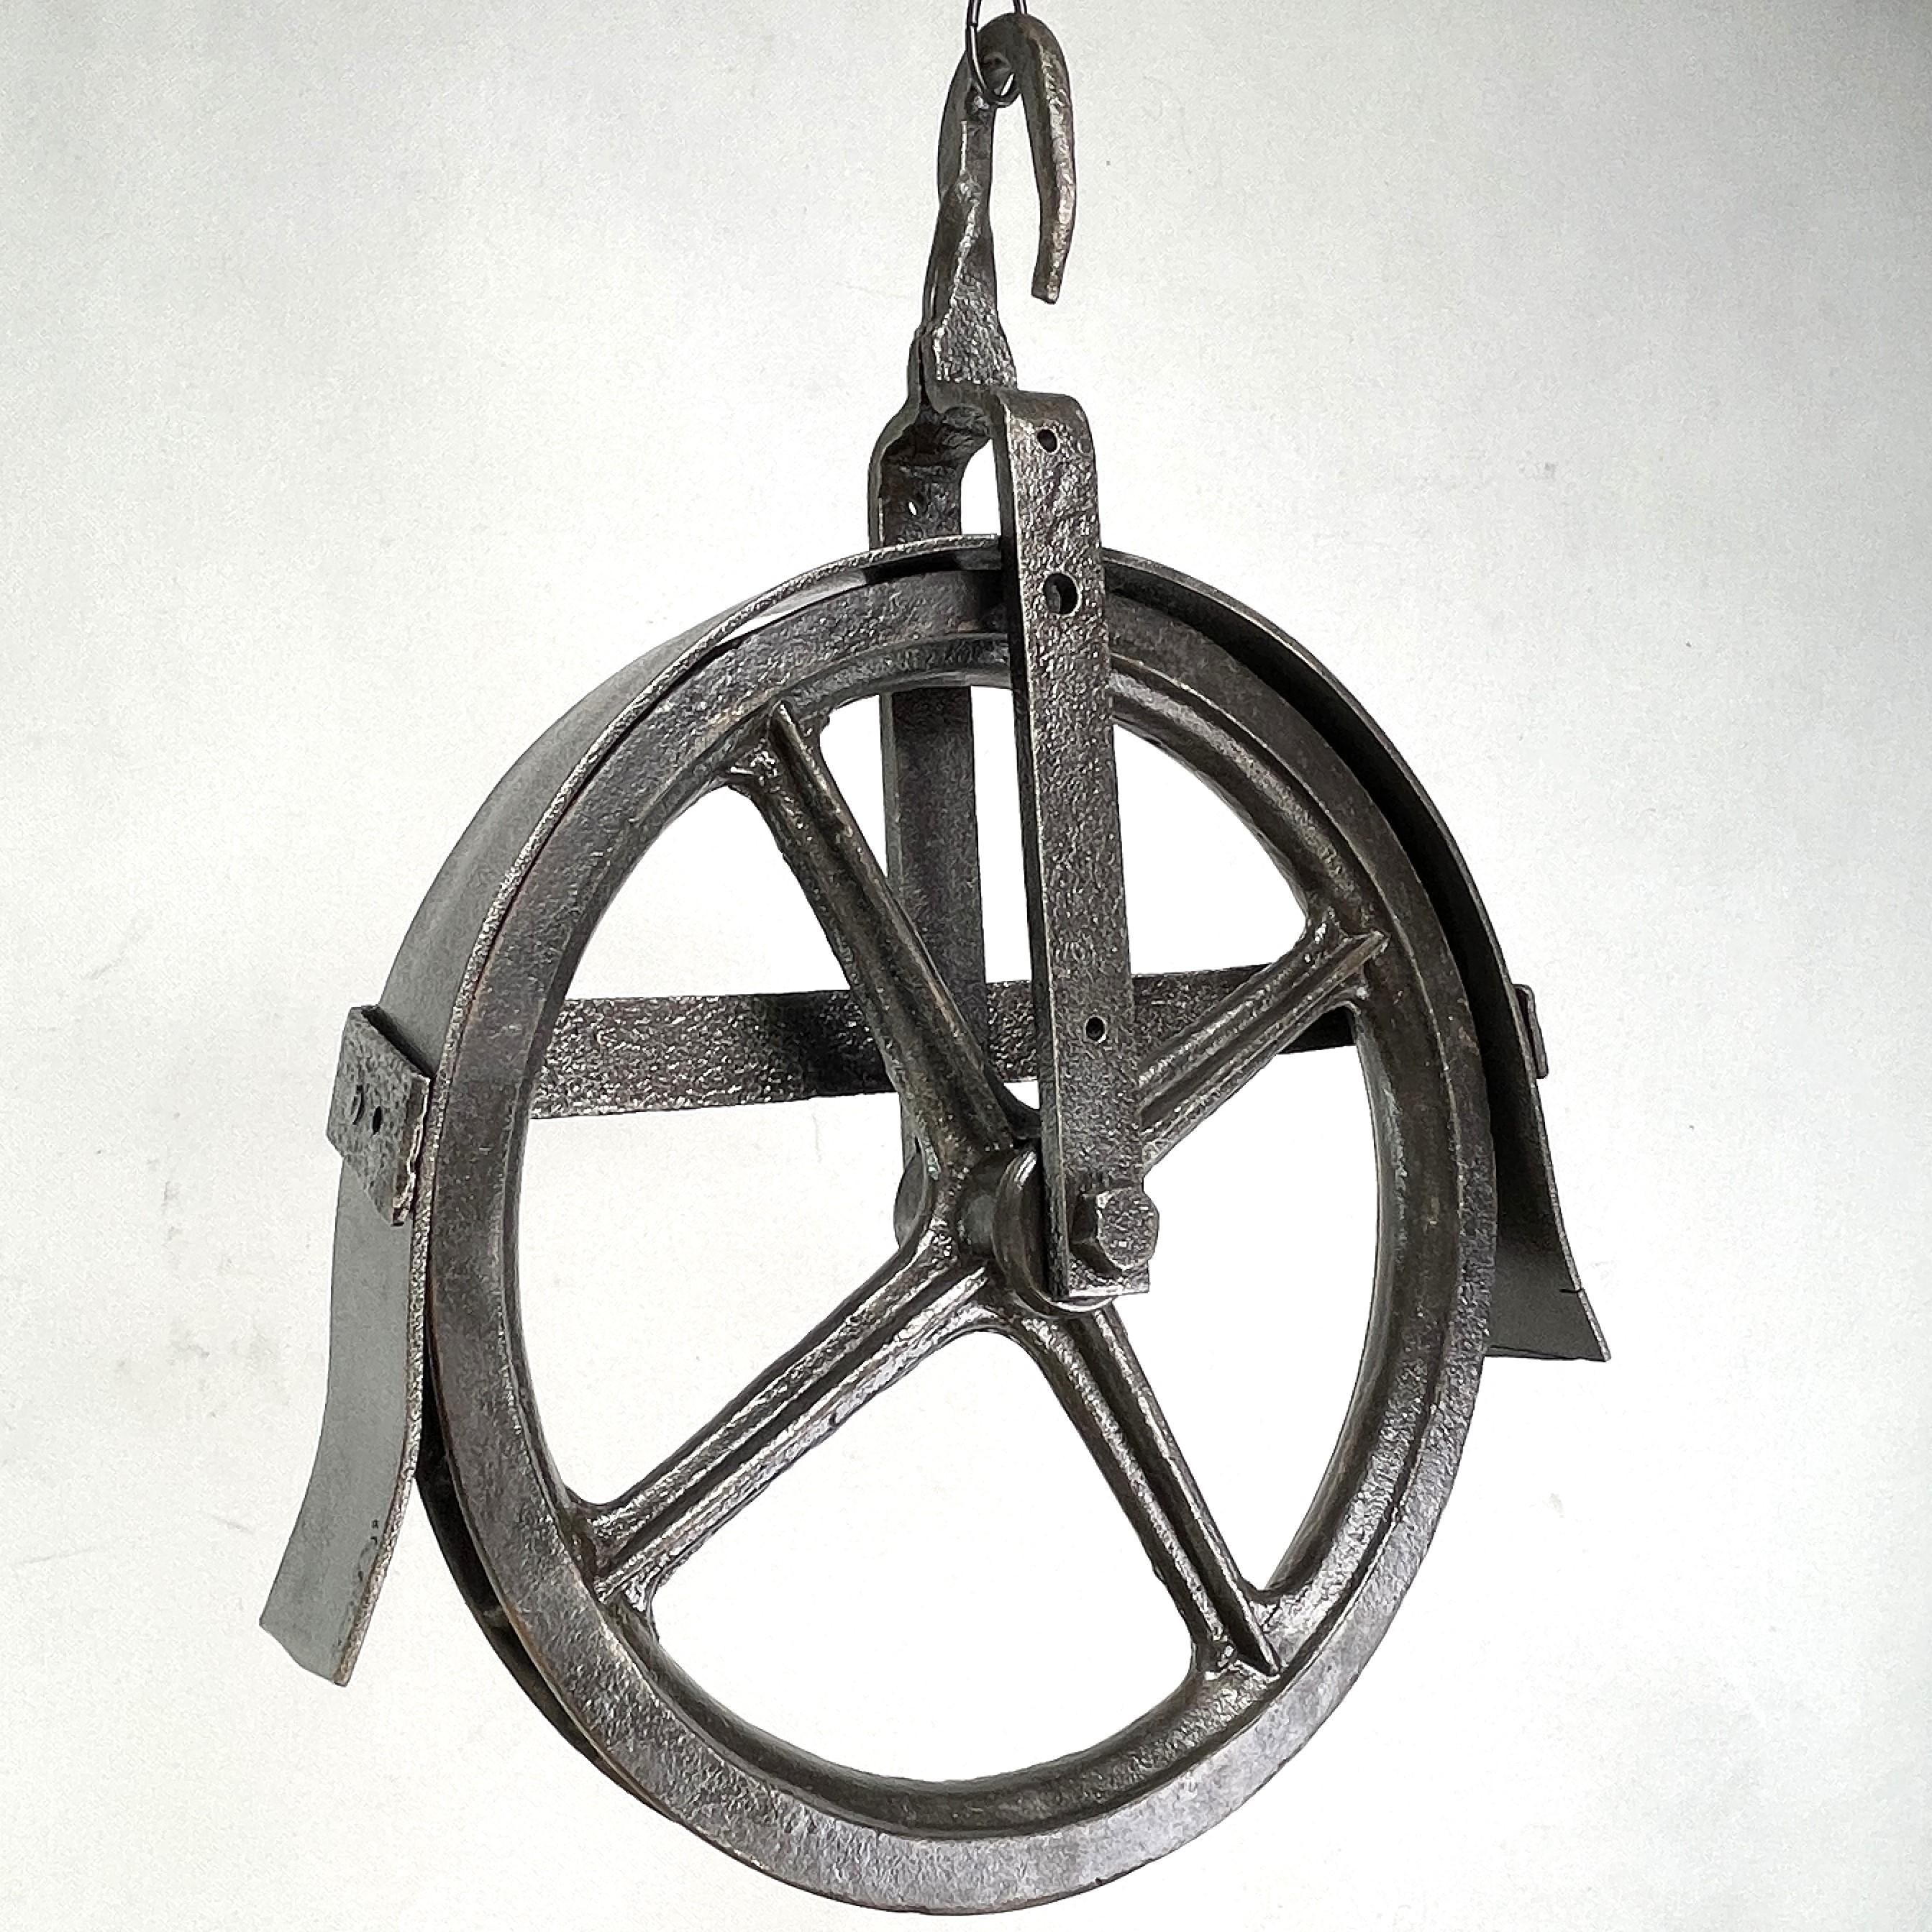 European Industrial Design large Pulley, 1950s